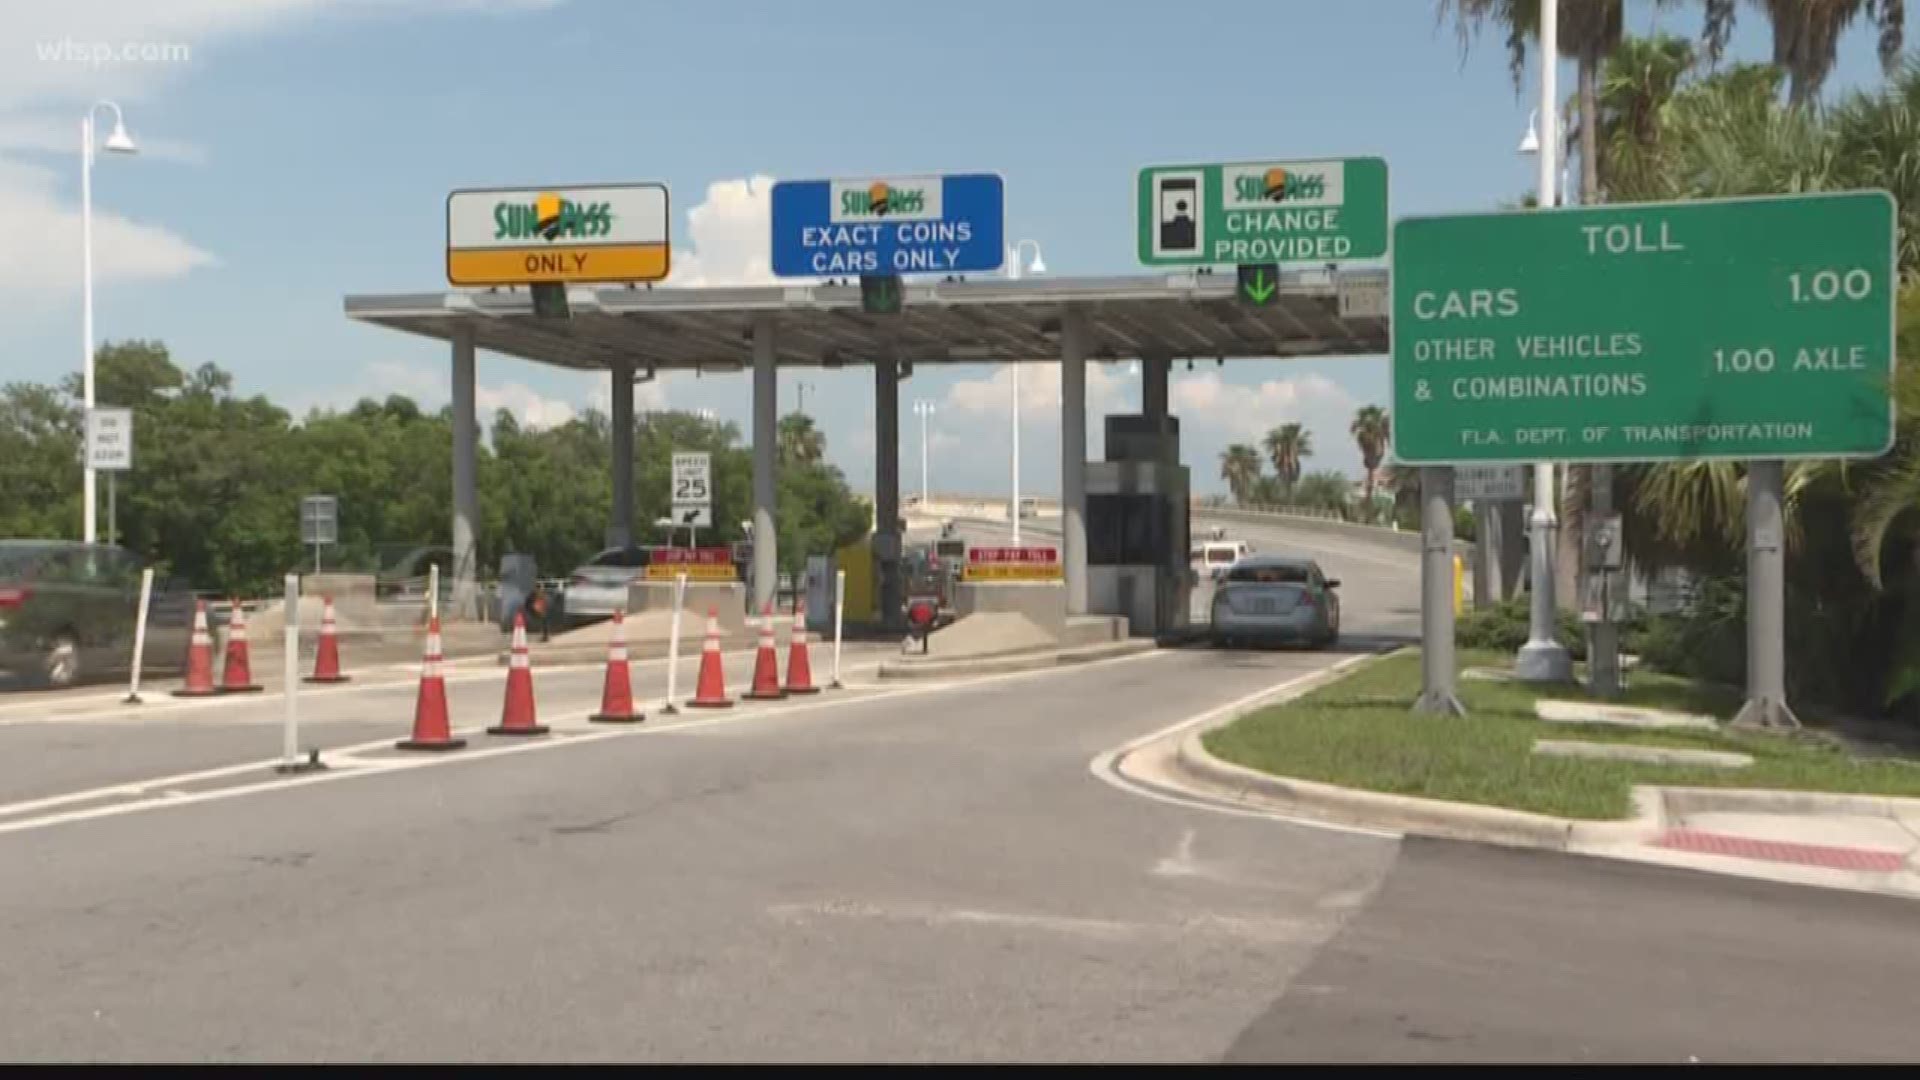 Thursday marks Day 77 of what was supposed to be a six-day disruption to Floridians' SunPass accounts.